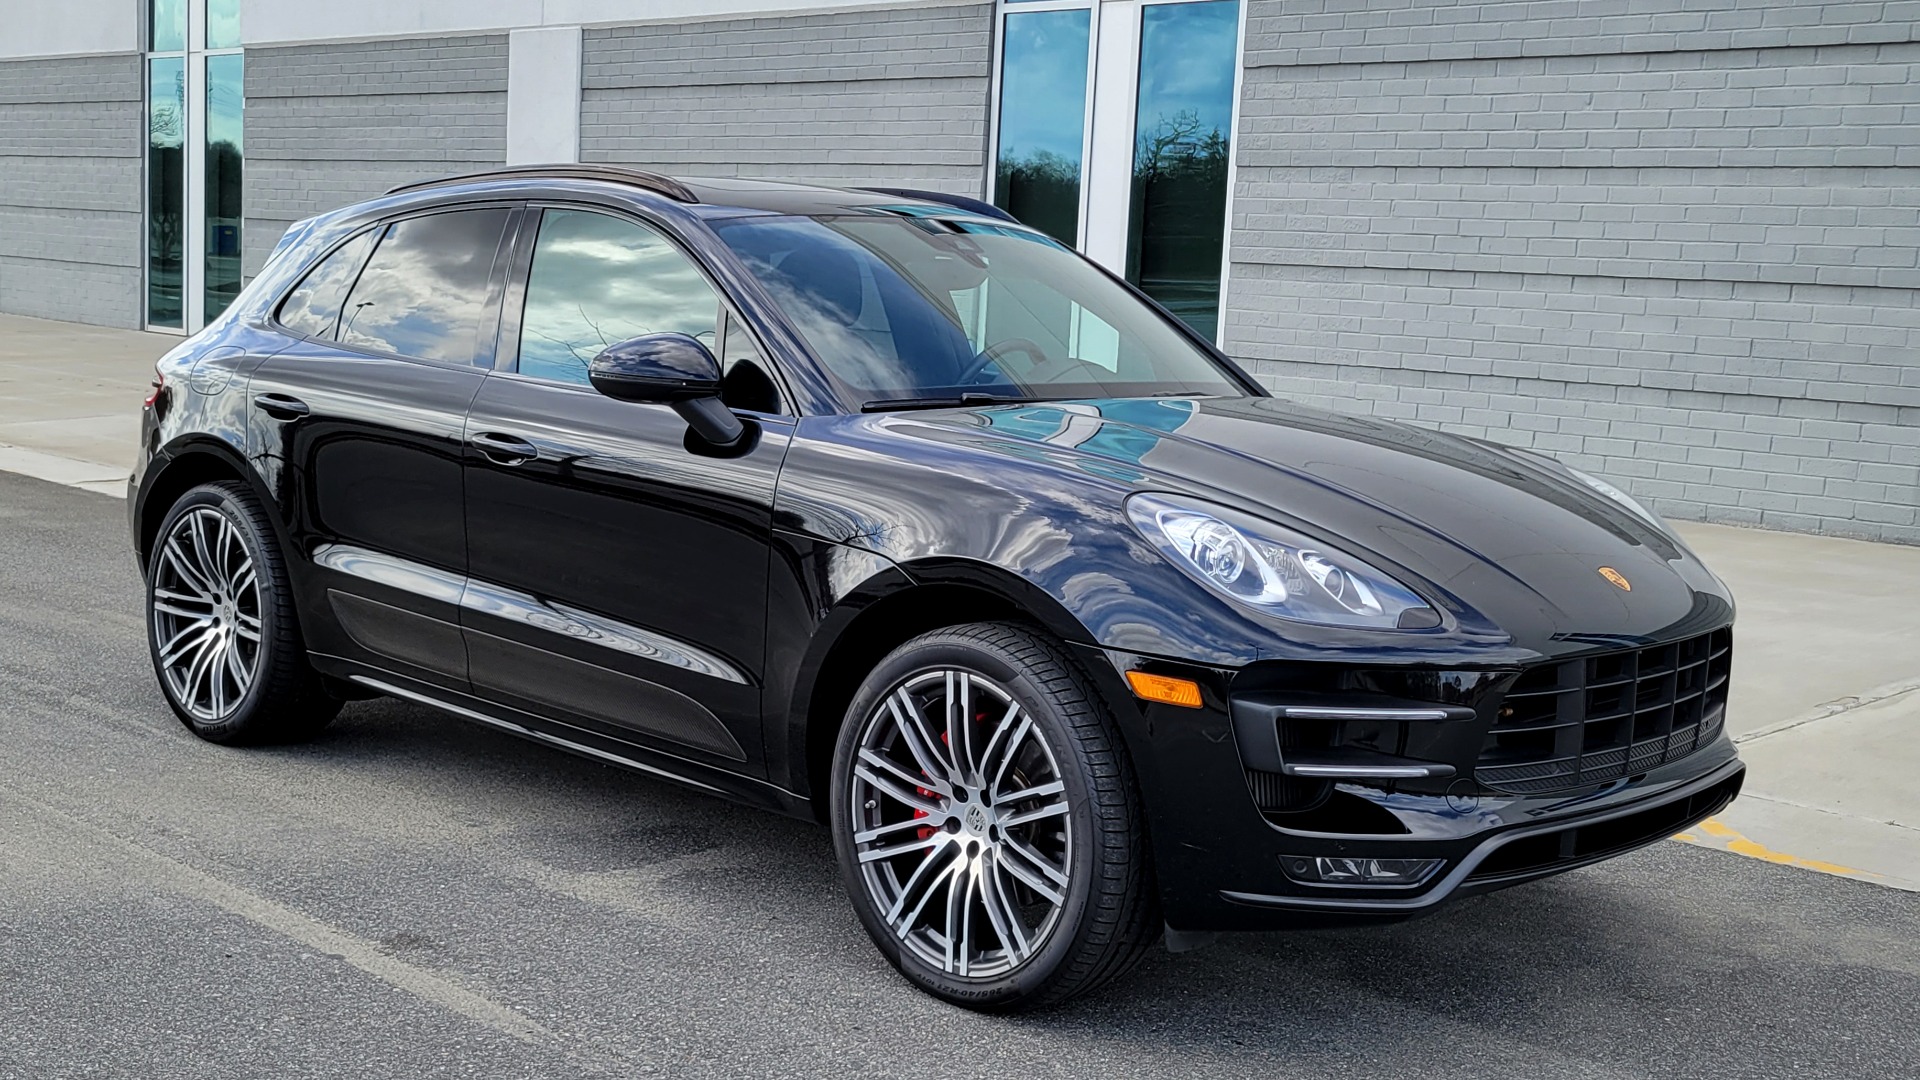 Used 2016 Porsche MACAN TURBO 3.6L PREMIUM / NAV / BOSE / SUNROOF / REARVIEW for sale Sold at Formula Imports in Charlotte NC 28227 6